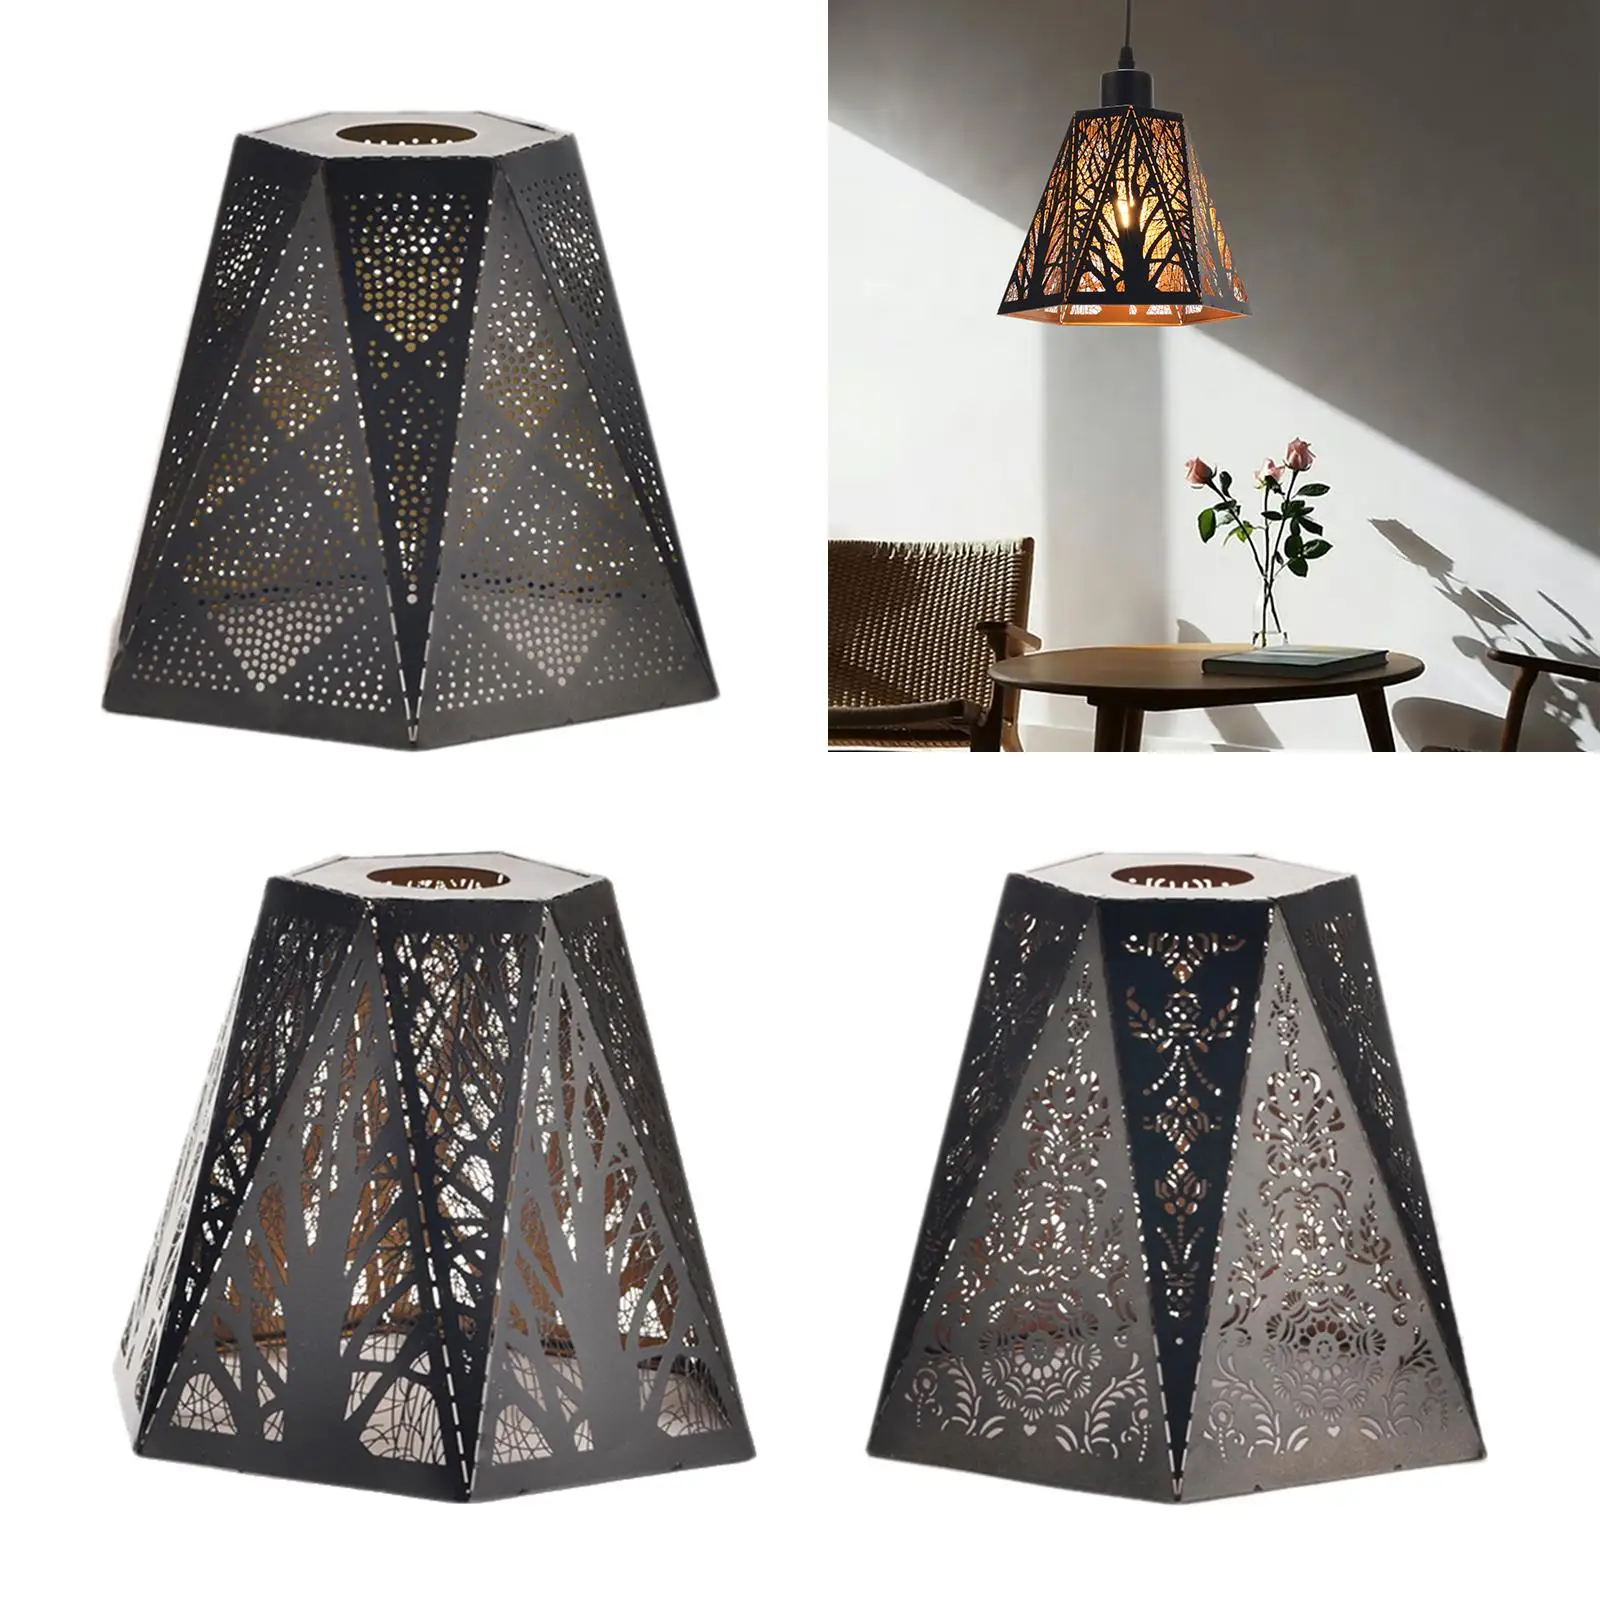 Modern Fashion Lamp Shade Iron Lampshade Carving Metal Cage Lamp Shade Cover for Kitchen Island Bedroom Hotel Cafe Decor